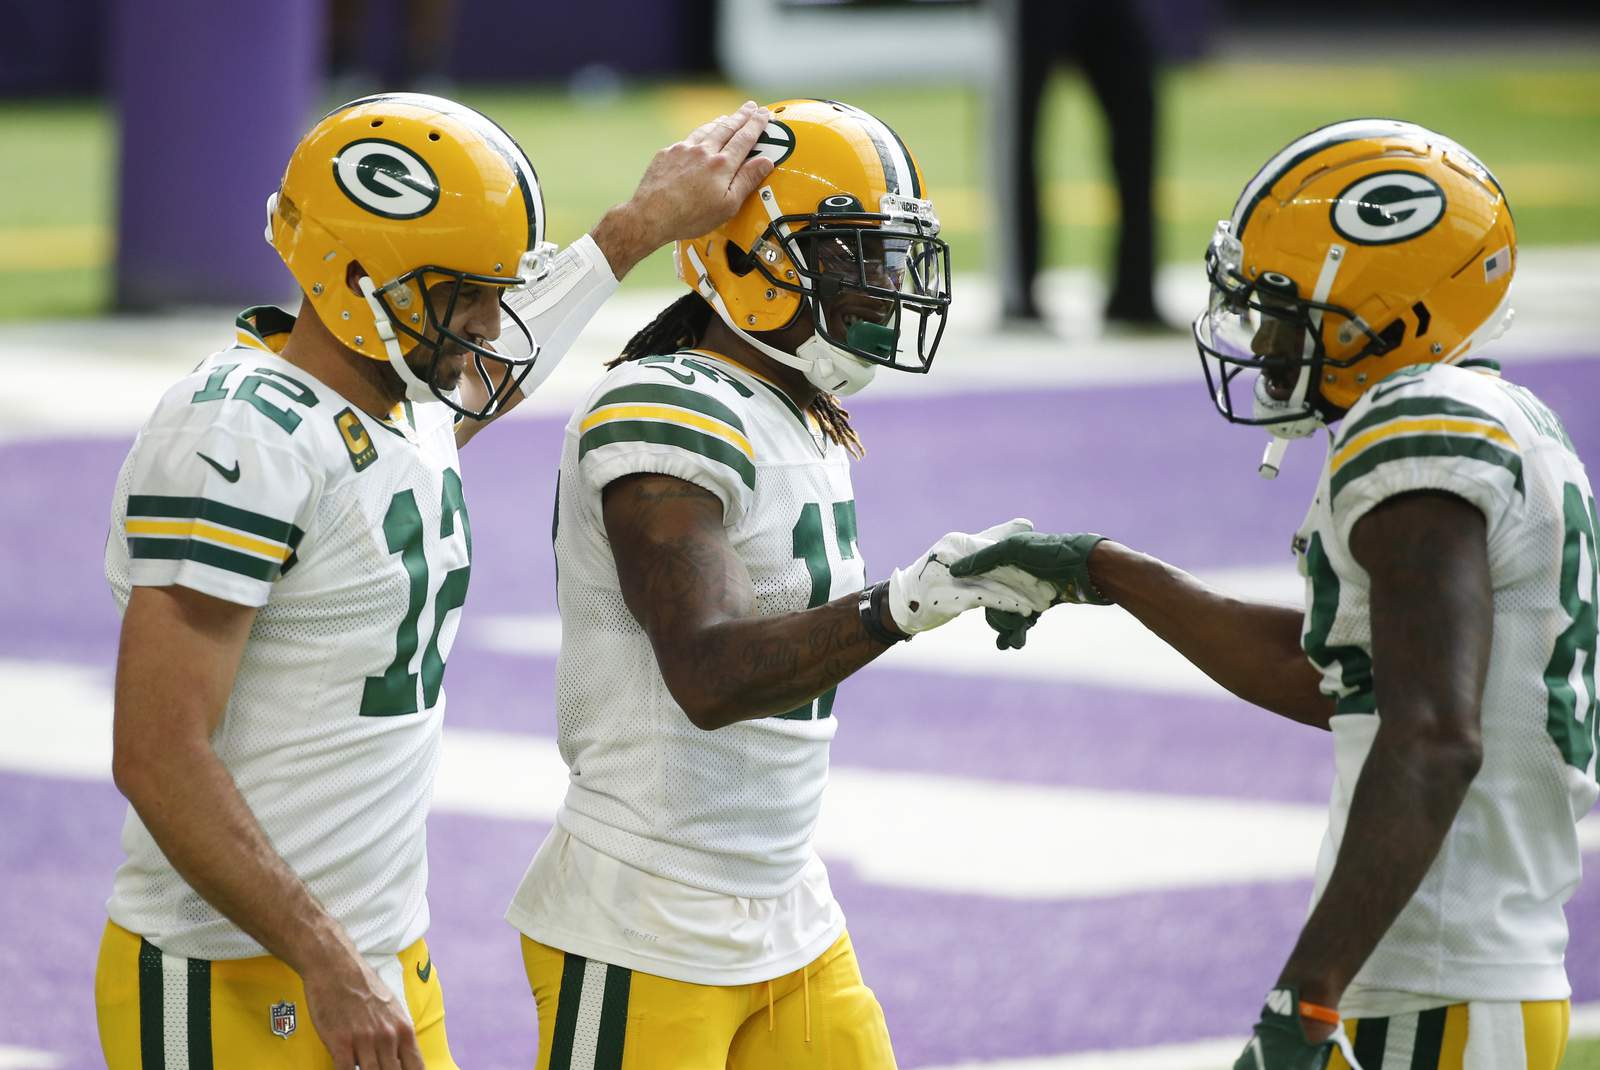 Rodgers at ease as Packers roll past Vikings 43-34